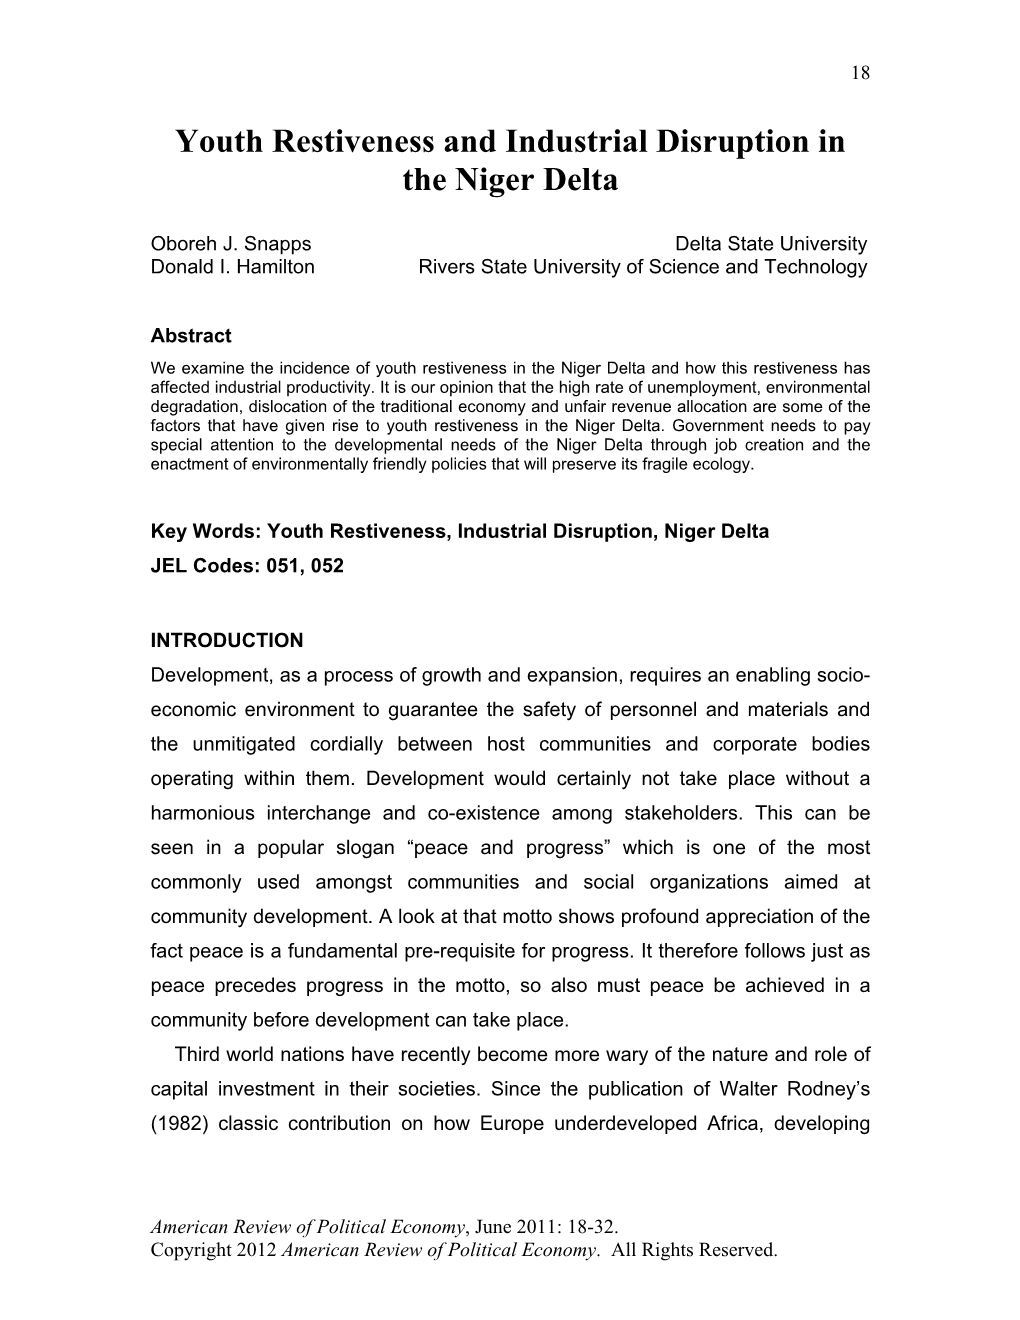 Youth Restiveness and Industrial Disruption in the Niger Delta